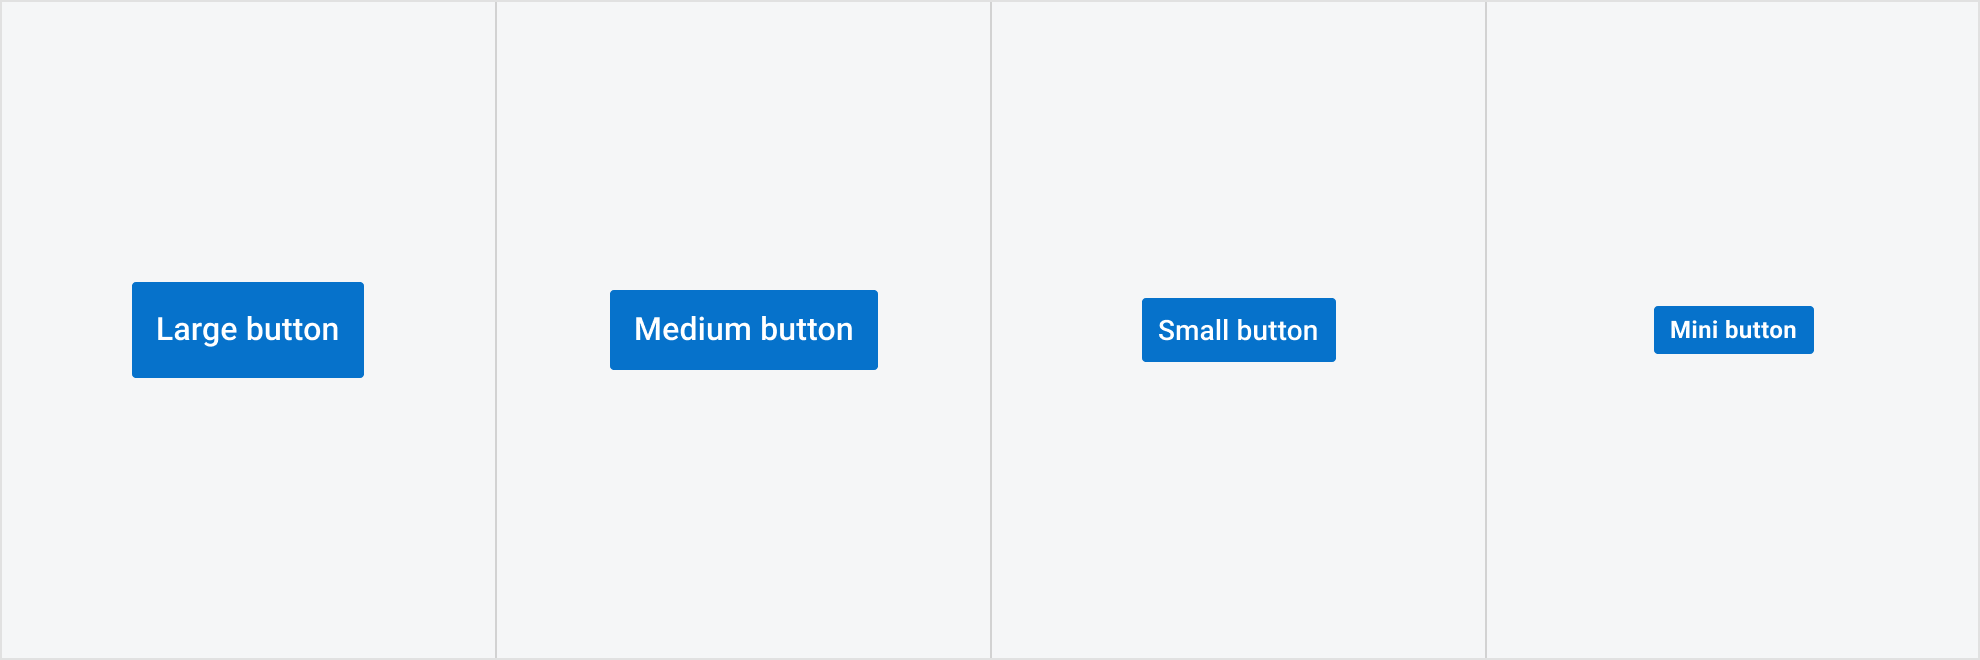 Image showing the 4 button sizes: large, medium, small, and mini.